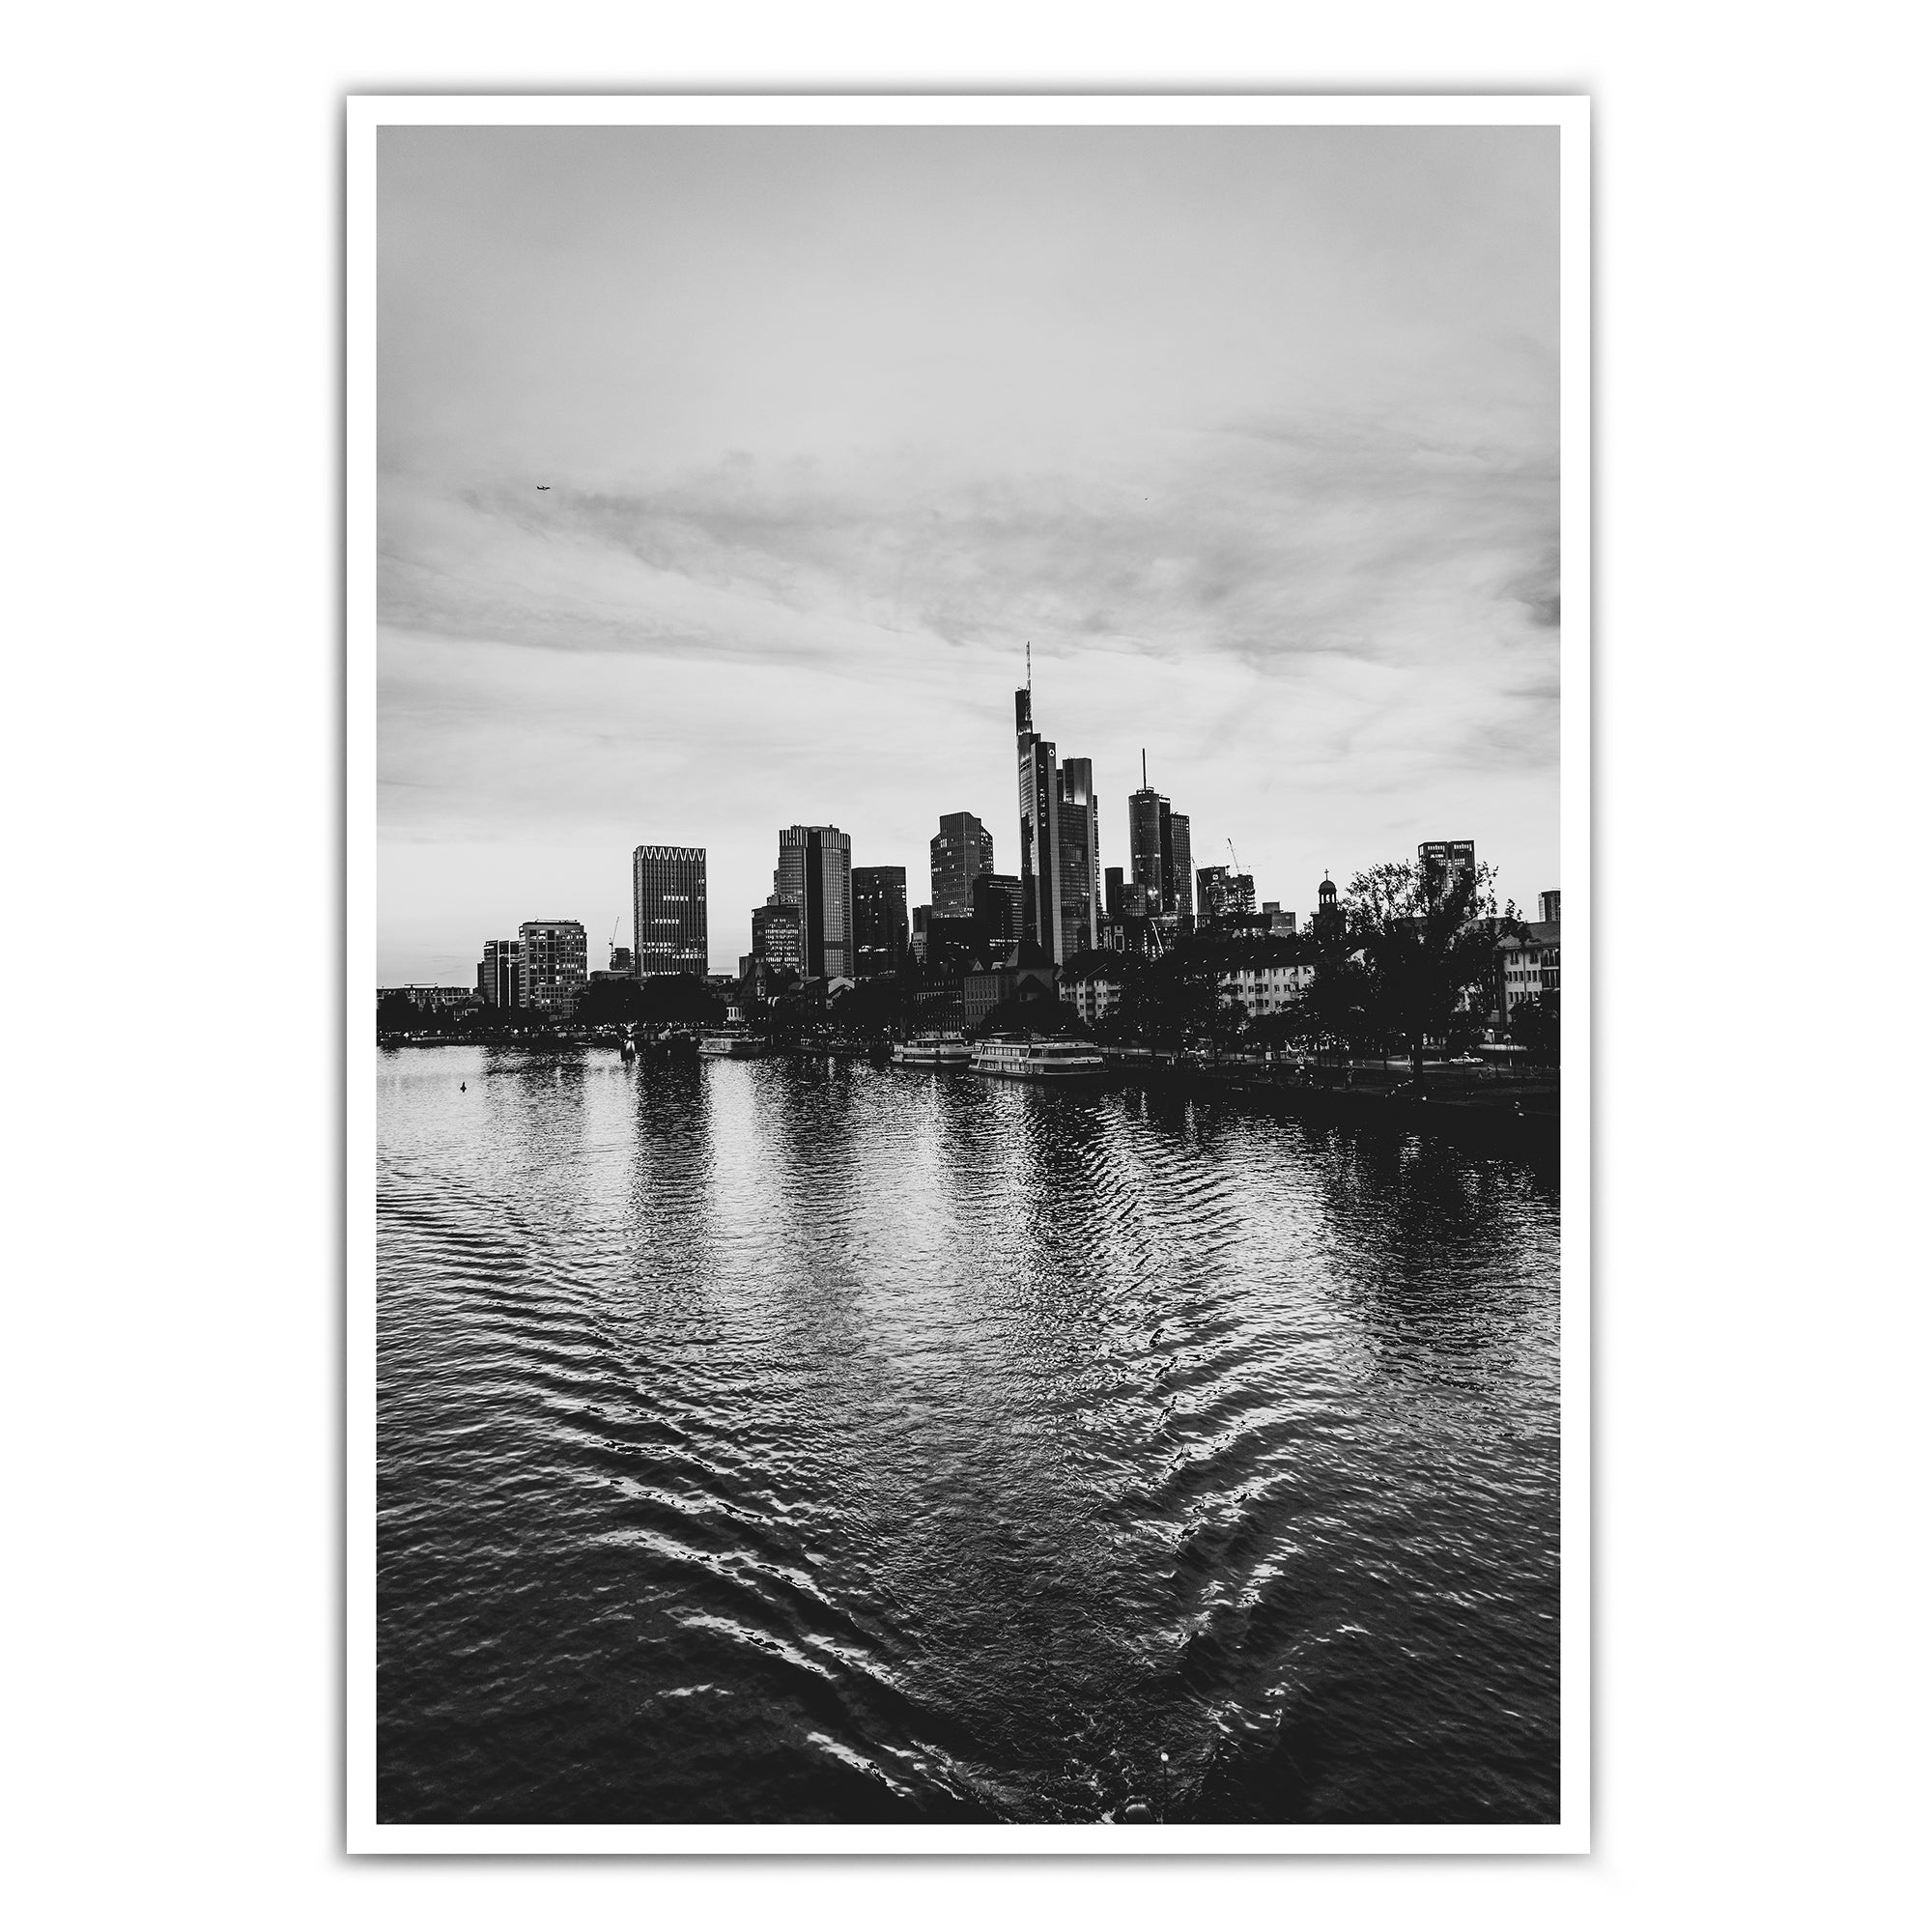 4one-pictures-frankfurt-am-main-poster-skyline-bild-ffm-kunstdruck-shop-5mm_5a7c9df9-42bd-4b42-9a26-598a201b4da9.jpg